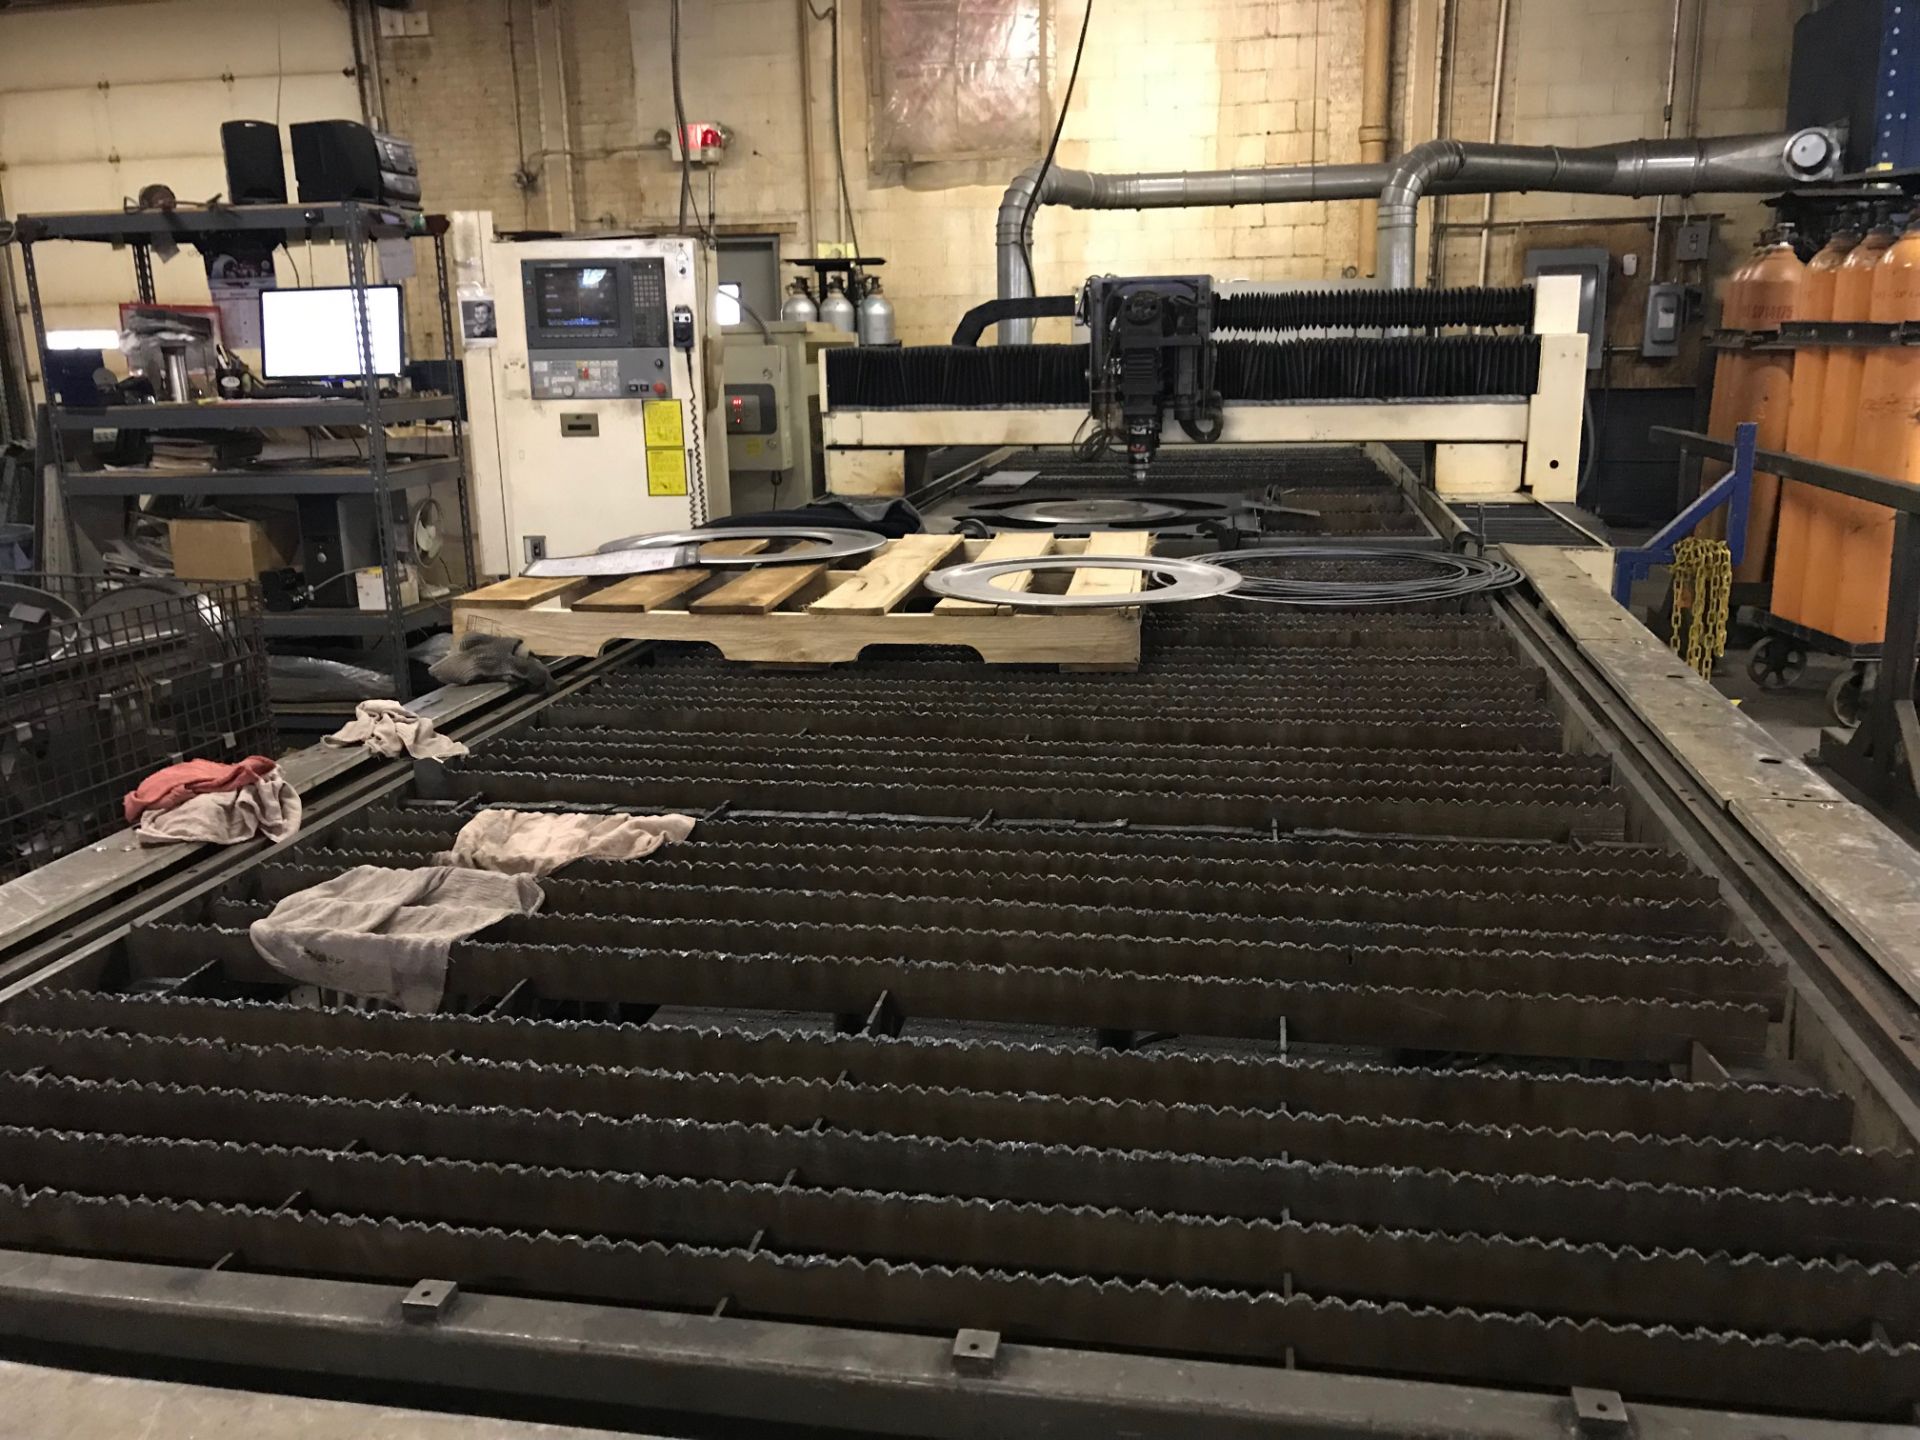 Mitshubi 120" x 60" CNC Laser Cutter with Controls - Image 8 of 9